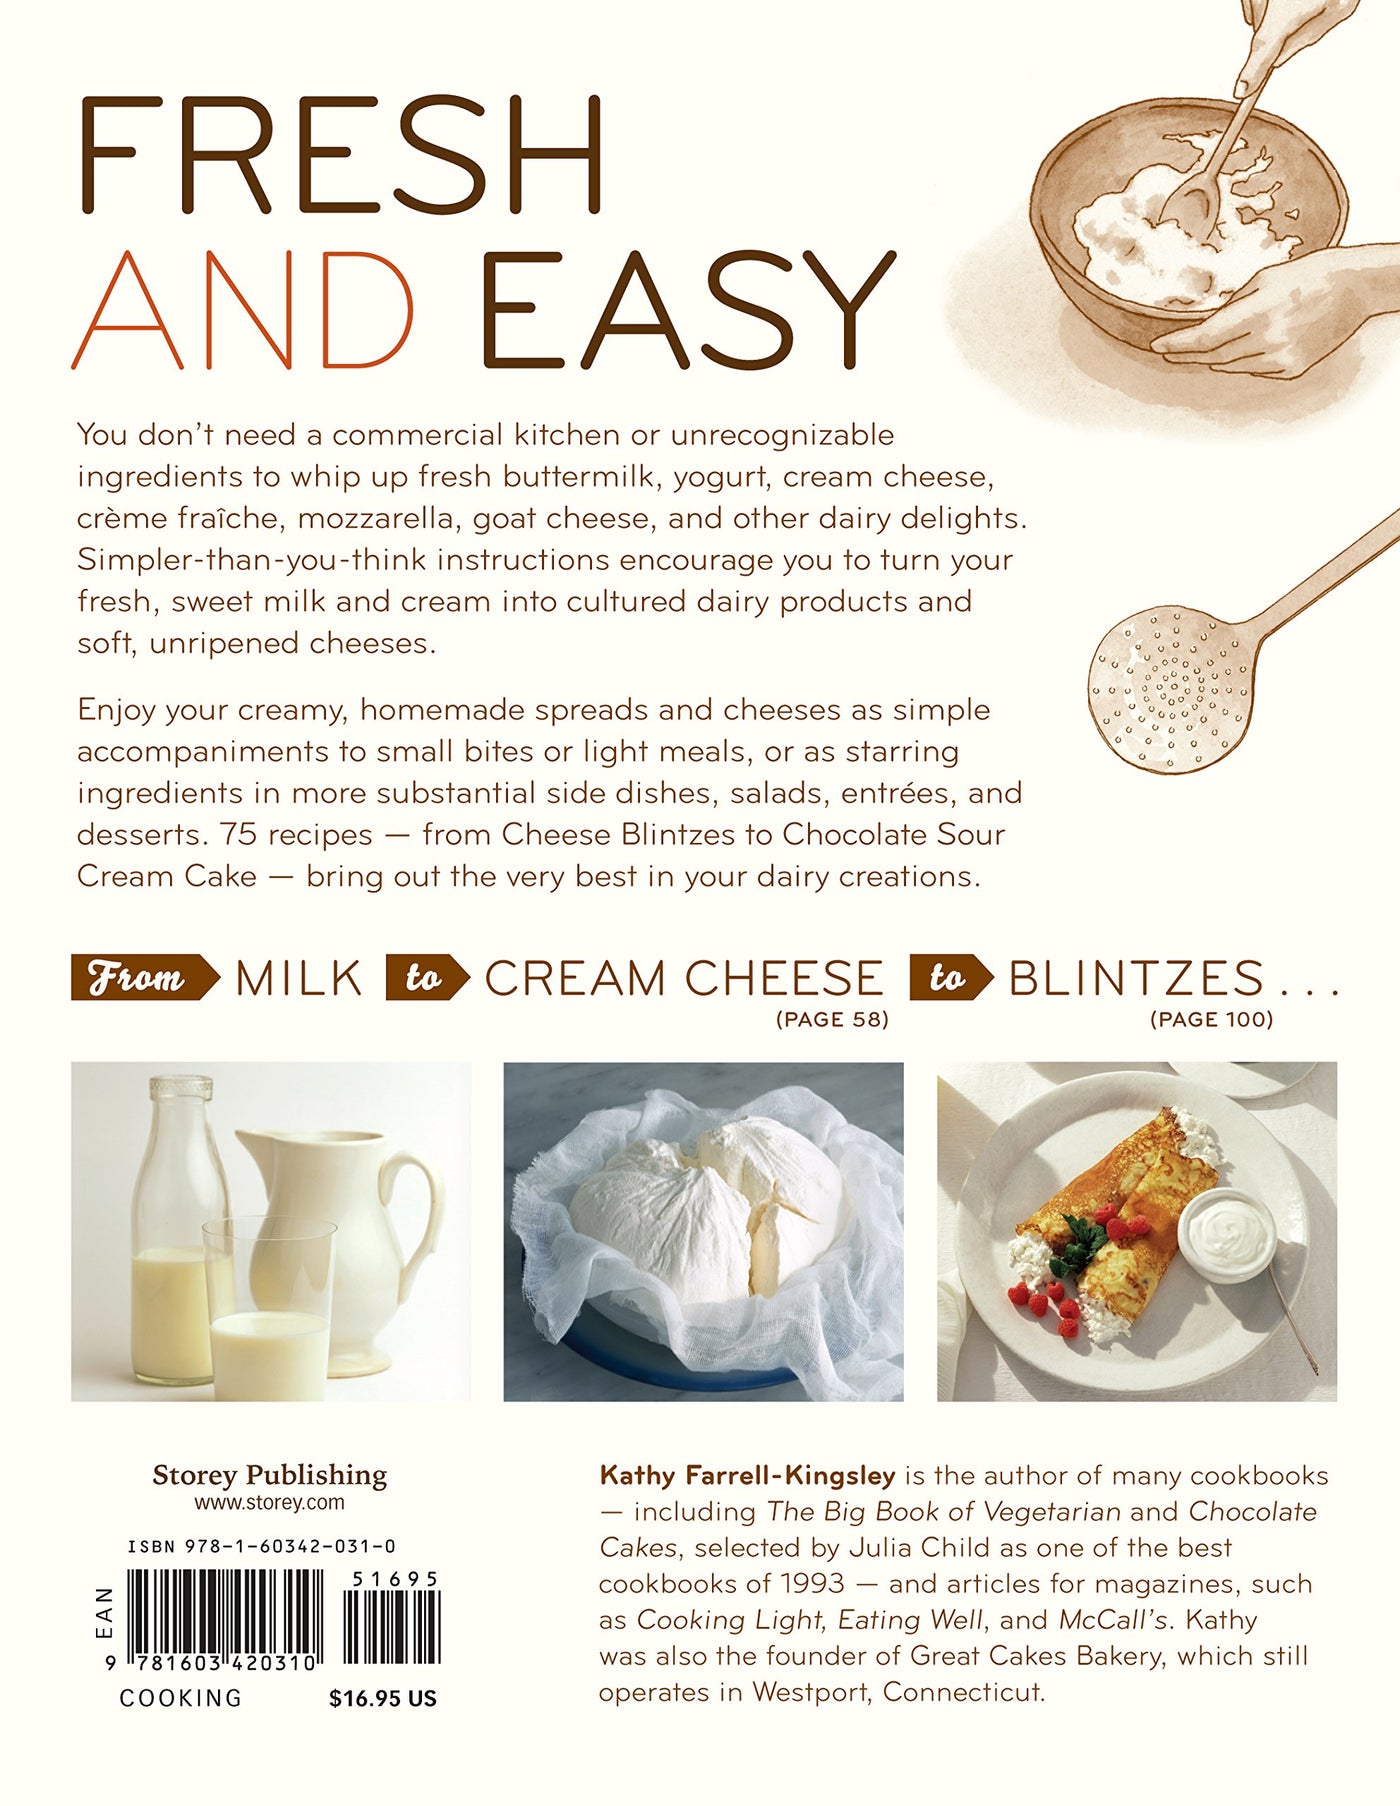 The Home Creamery: Make Your Own Fresh Dairy Products; Easy Recipes for Butter, Yogurt, Sour Cream, Creme Fraiche, Cream Cheese, Ricotta, and More!